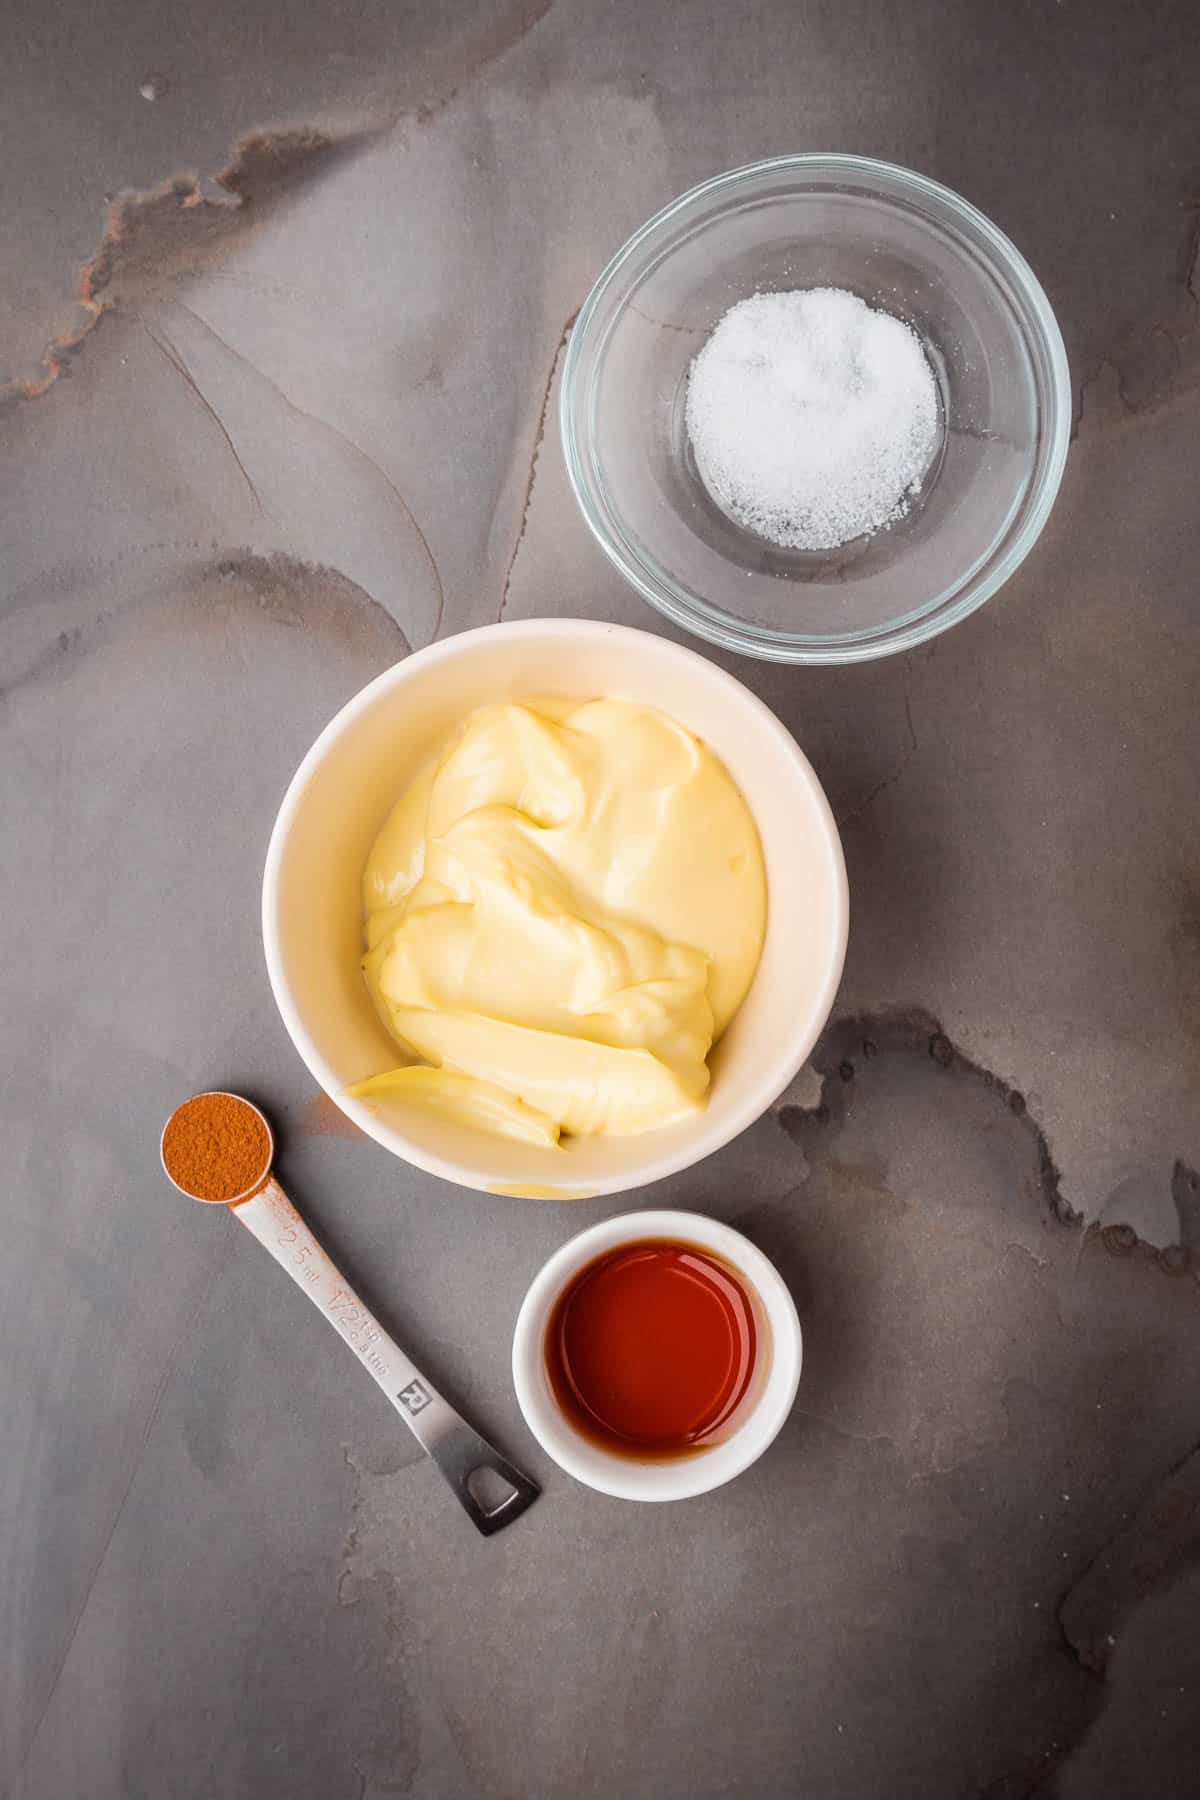 A bowl of homemade mayo with other ingredients and a spoon on a gray surface.